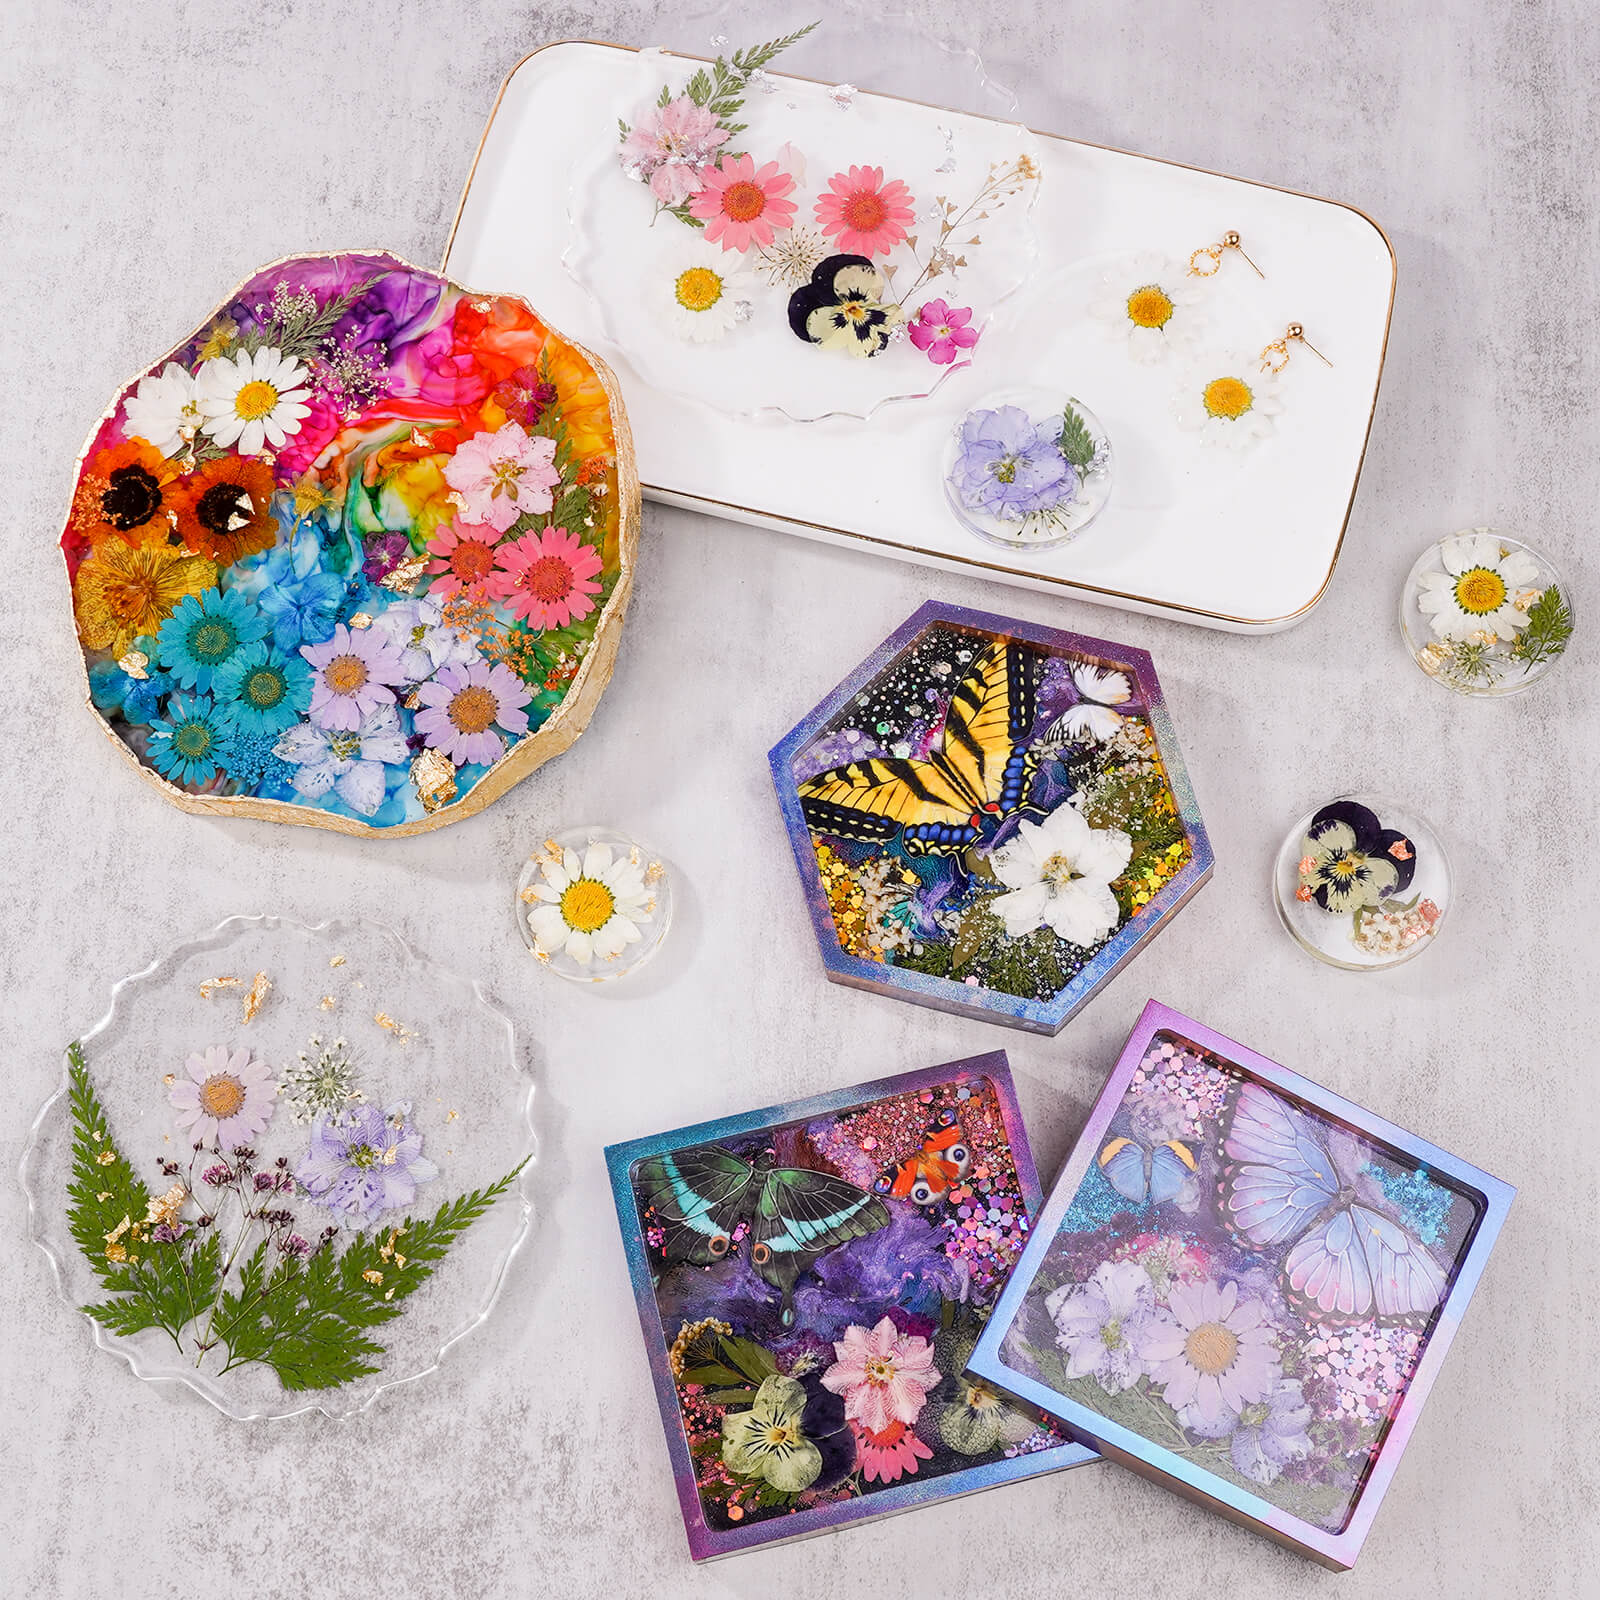 How to Make Colorful Resin Coasters with Dried Flowers